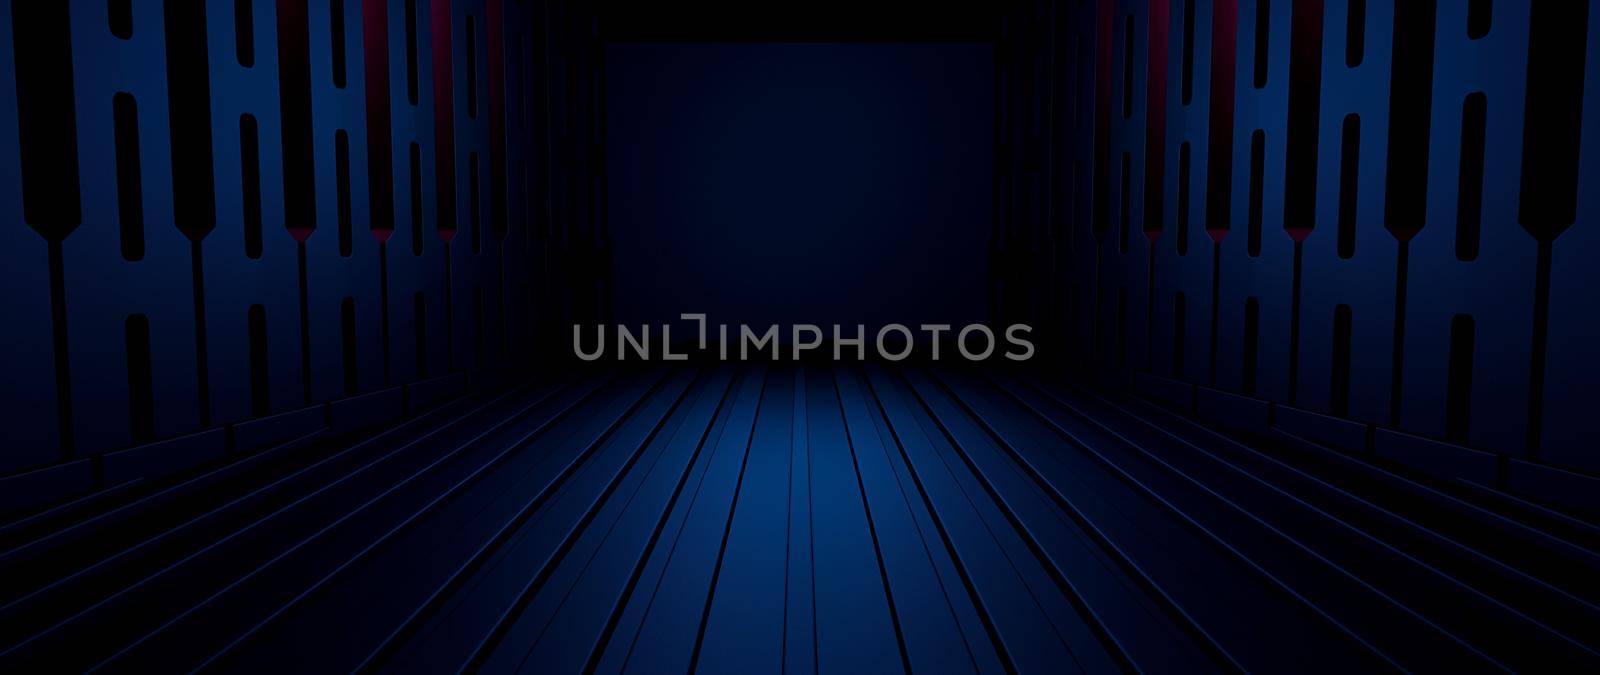 Abstract Scifi Grungy Reflective Metal Underground Tunnel Room Dimmed Black Background For Product Backgrounds Presentation 3D Rendering